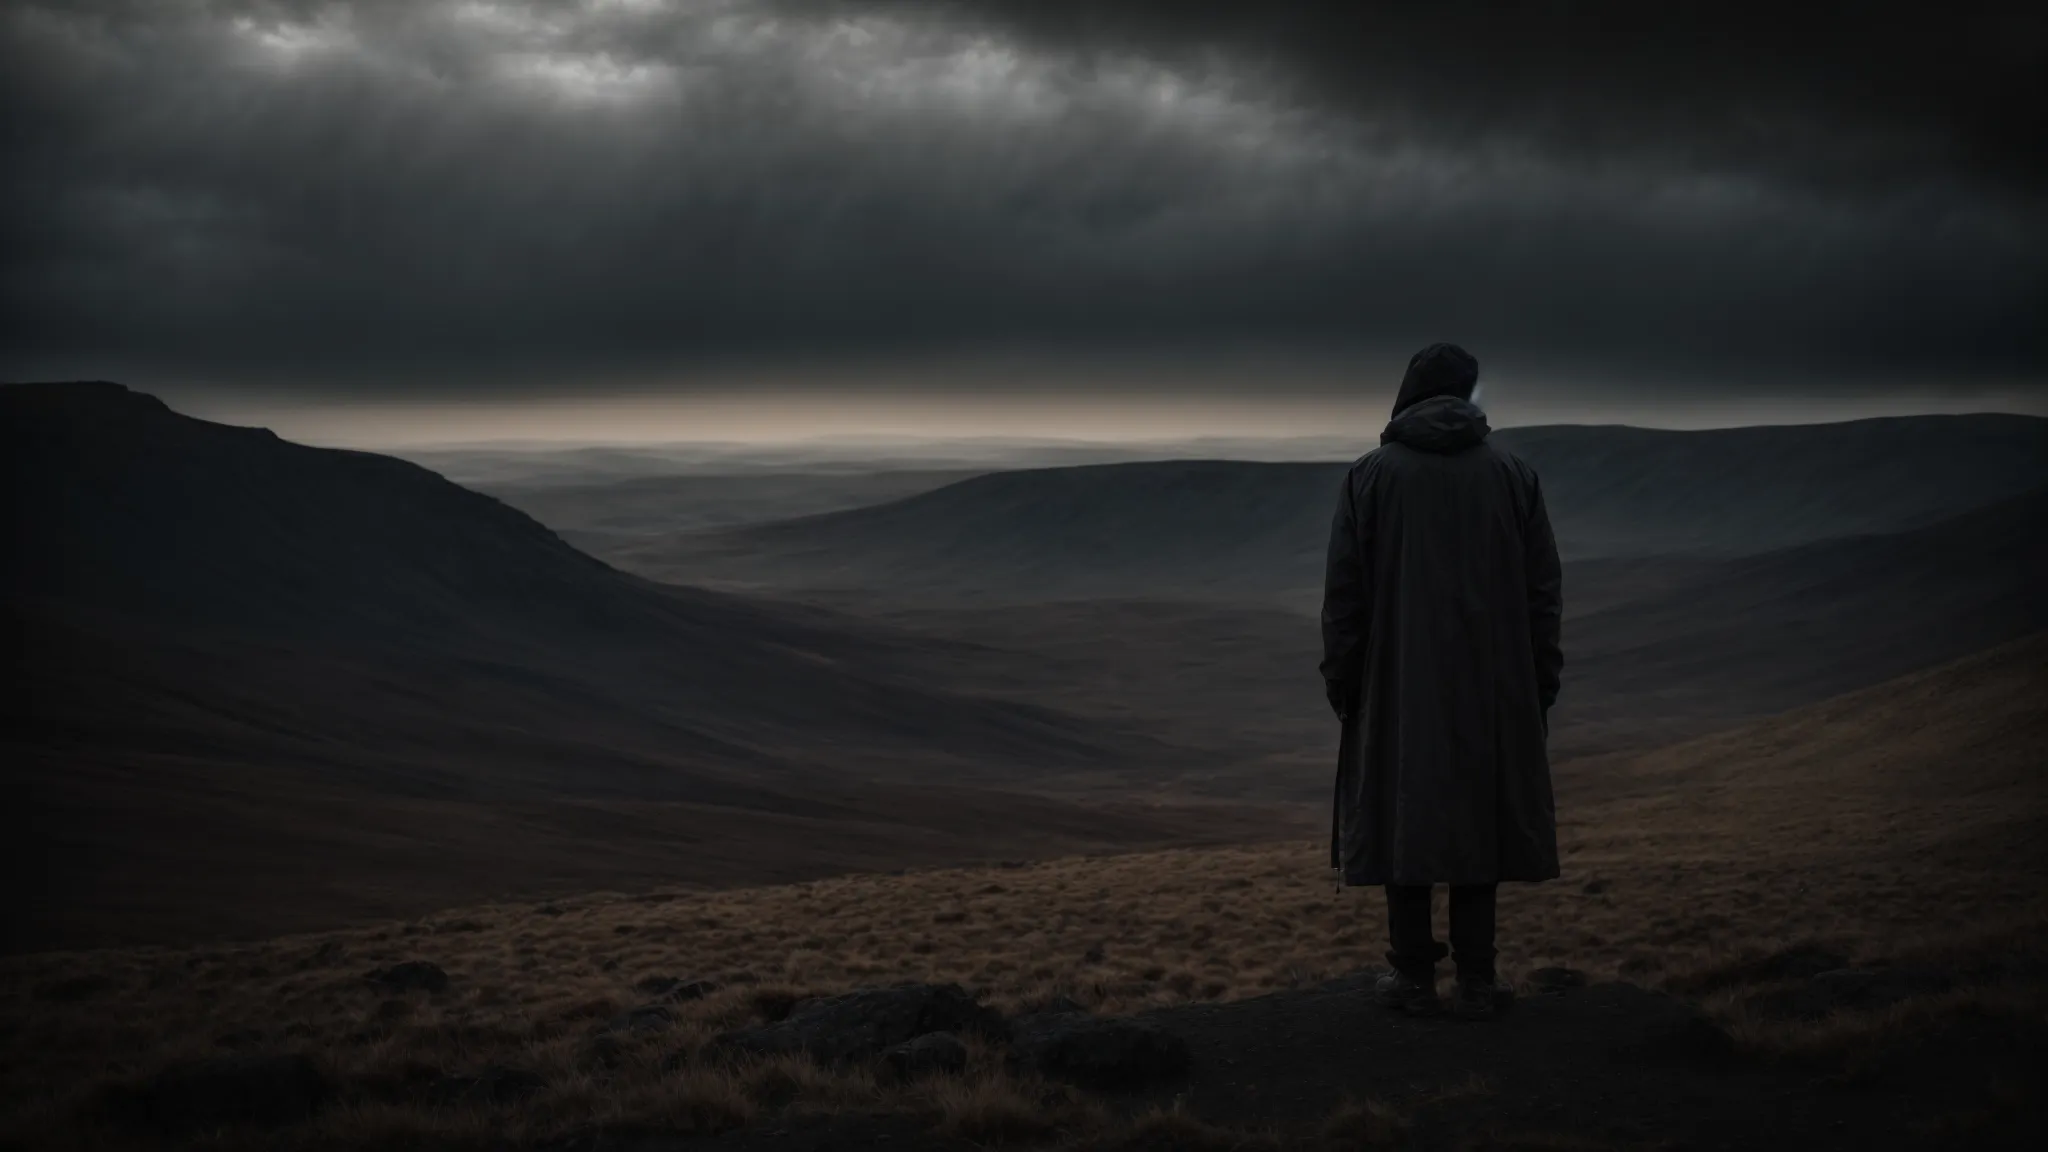 a solitary figure stands at the peak of a desolate landscape, gazing towards a horizon illuminated by a sliver of light between dark clouds, embodying the solitary journey of persistence and breakthrough.